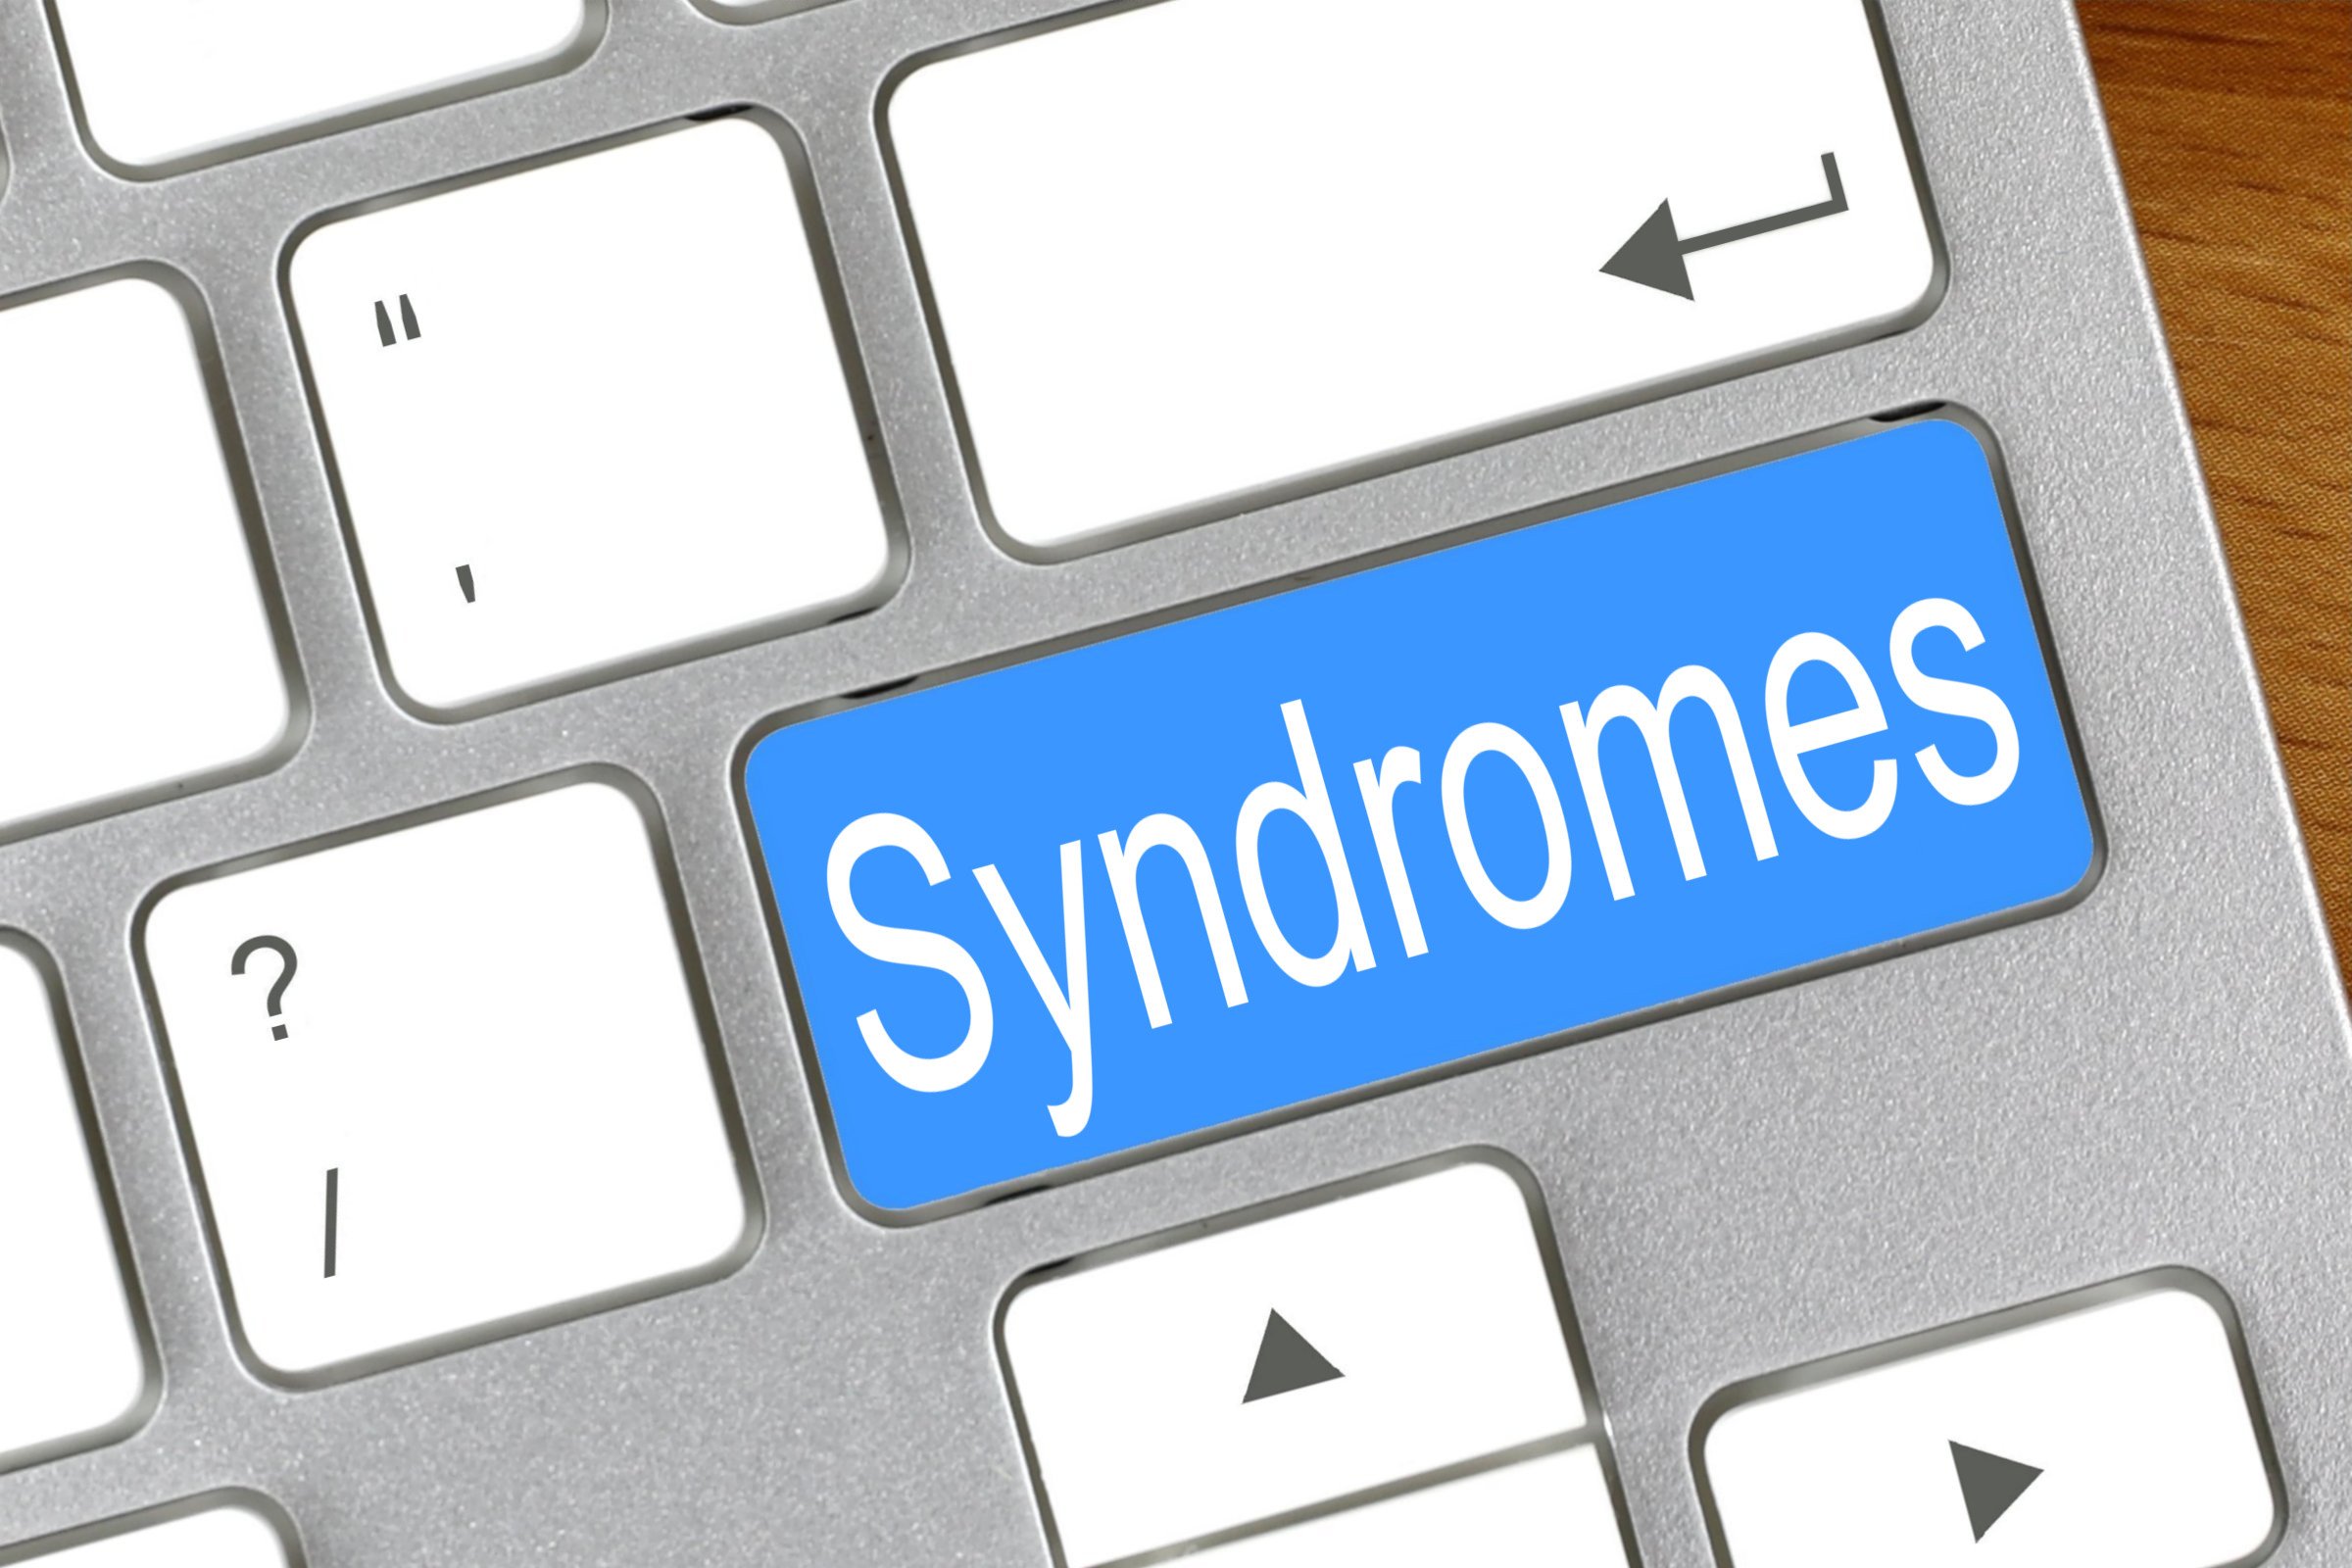 syndromes